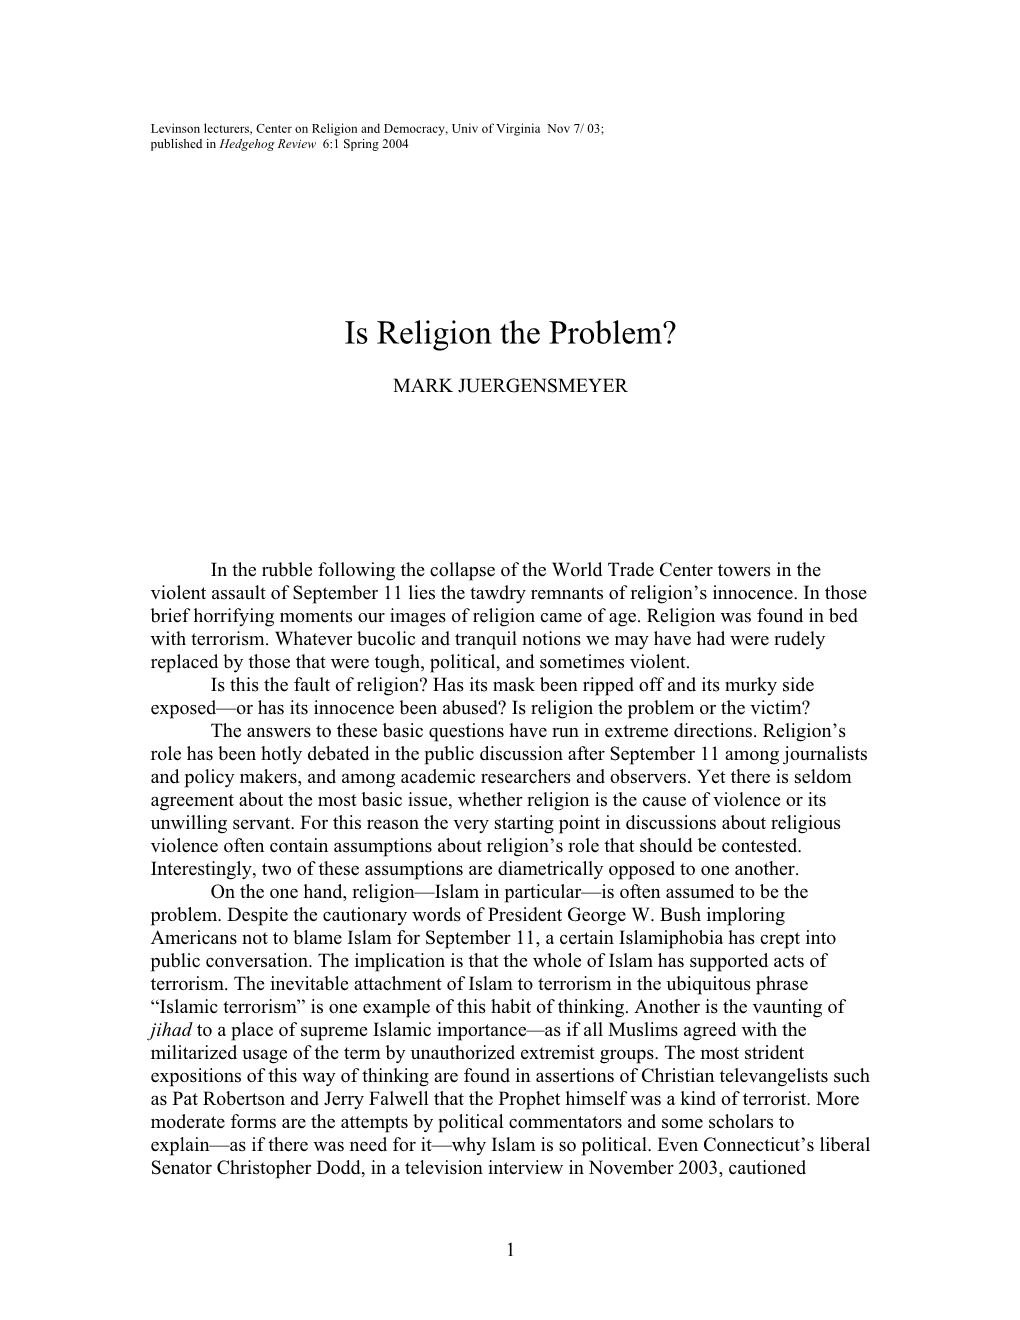 Levinson Lecturers, Center on Religion and Democracy, Univ of Virginia Nov 7/ 03; Published in Hedgehog Review 6:1 Spring 2004